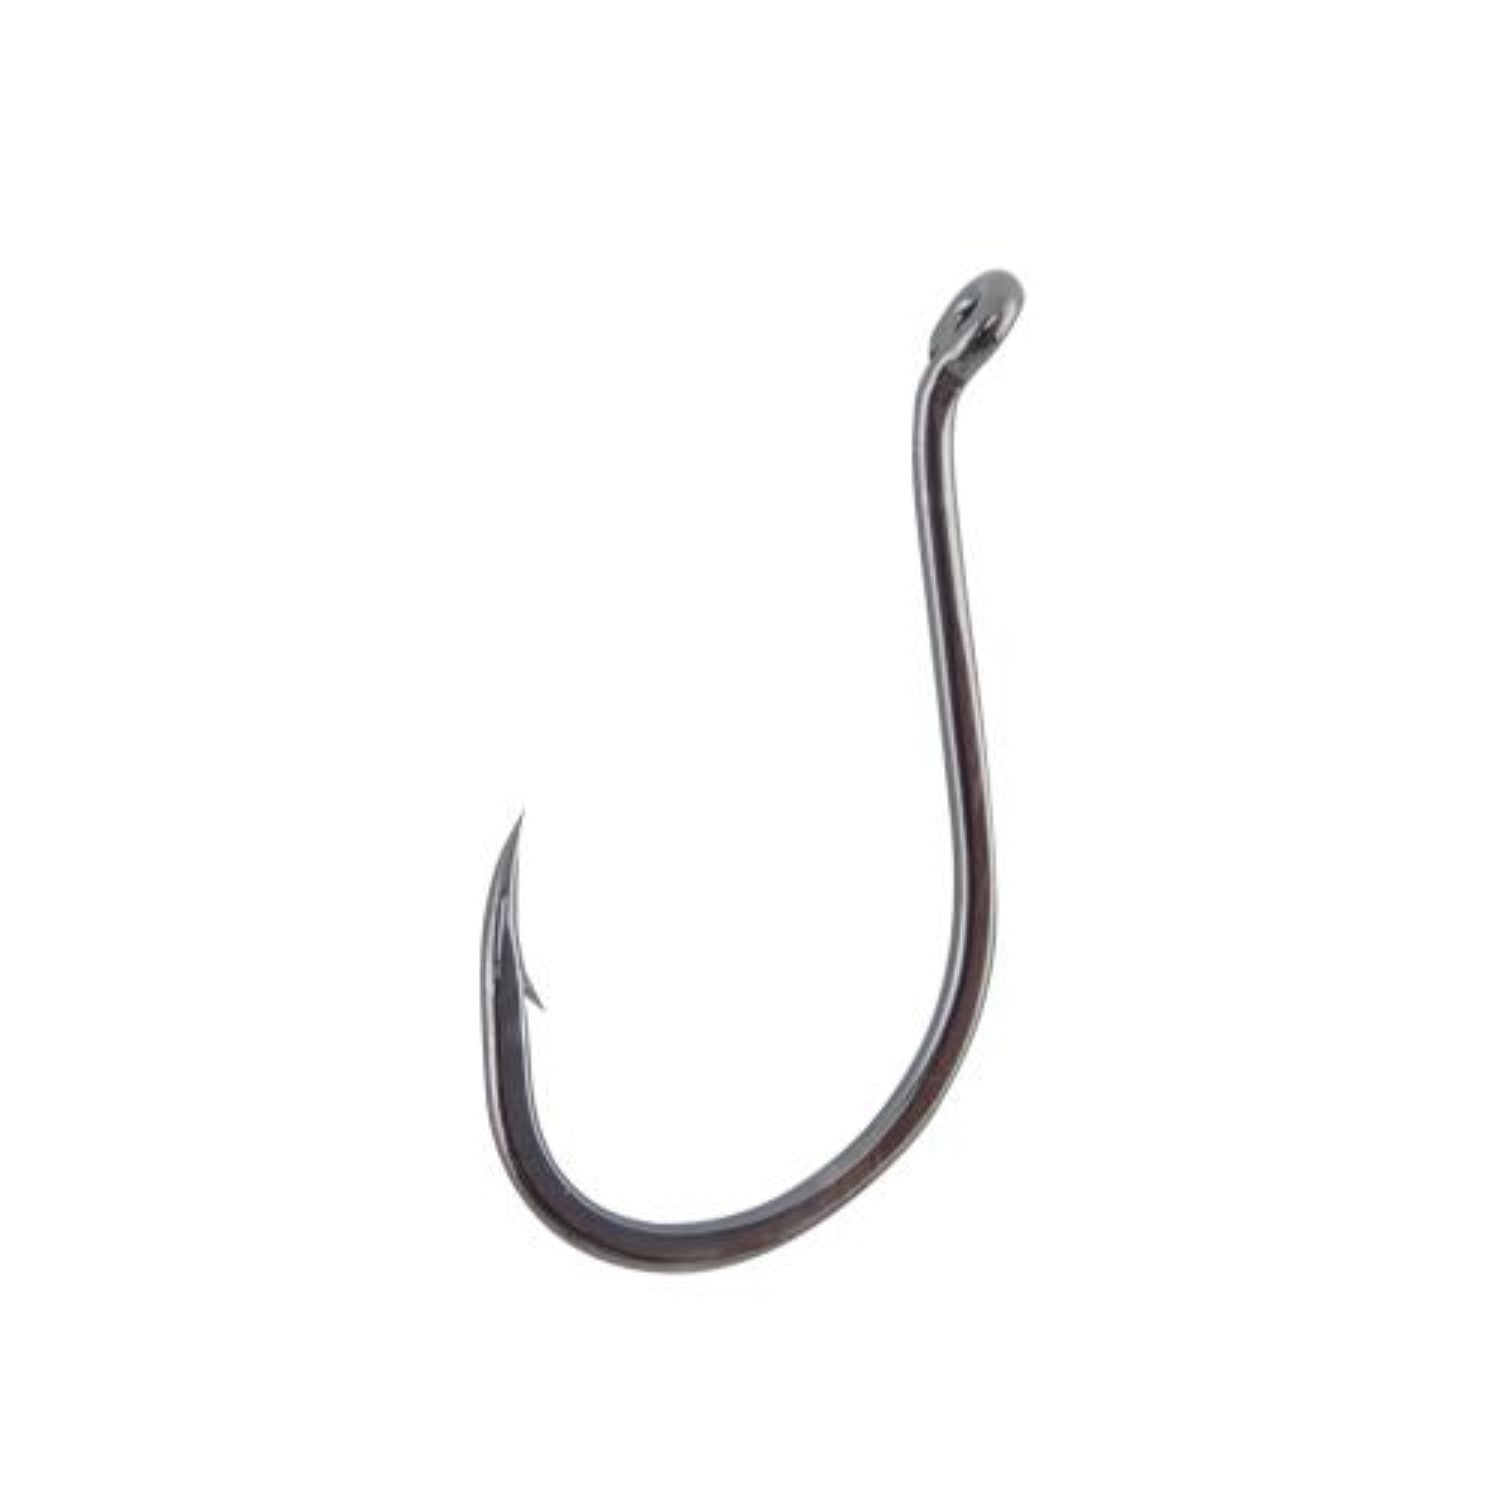 Gamakatsu Catfish Hook Assortment from Fish On Outlet